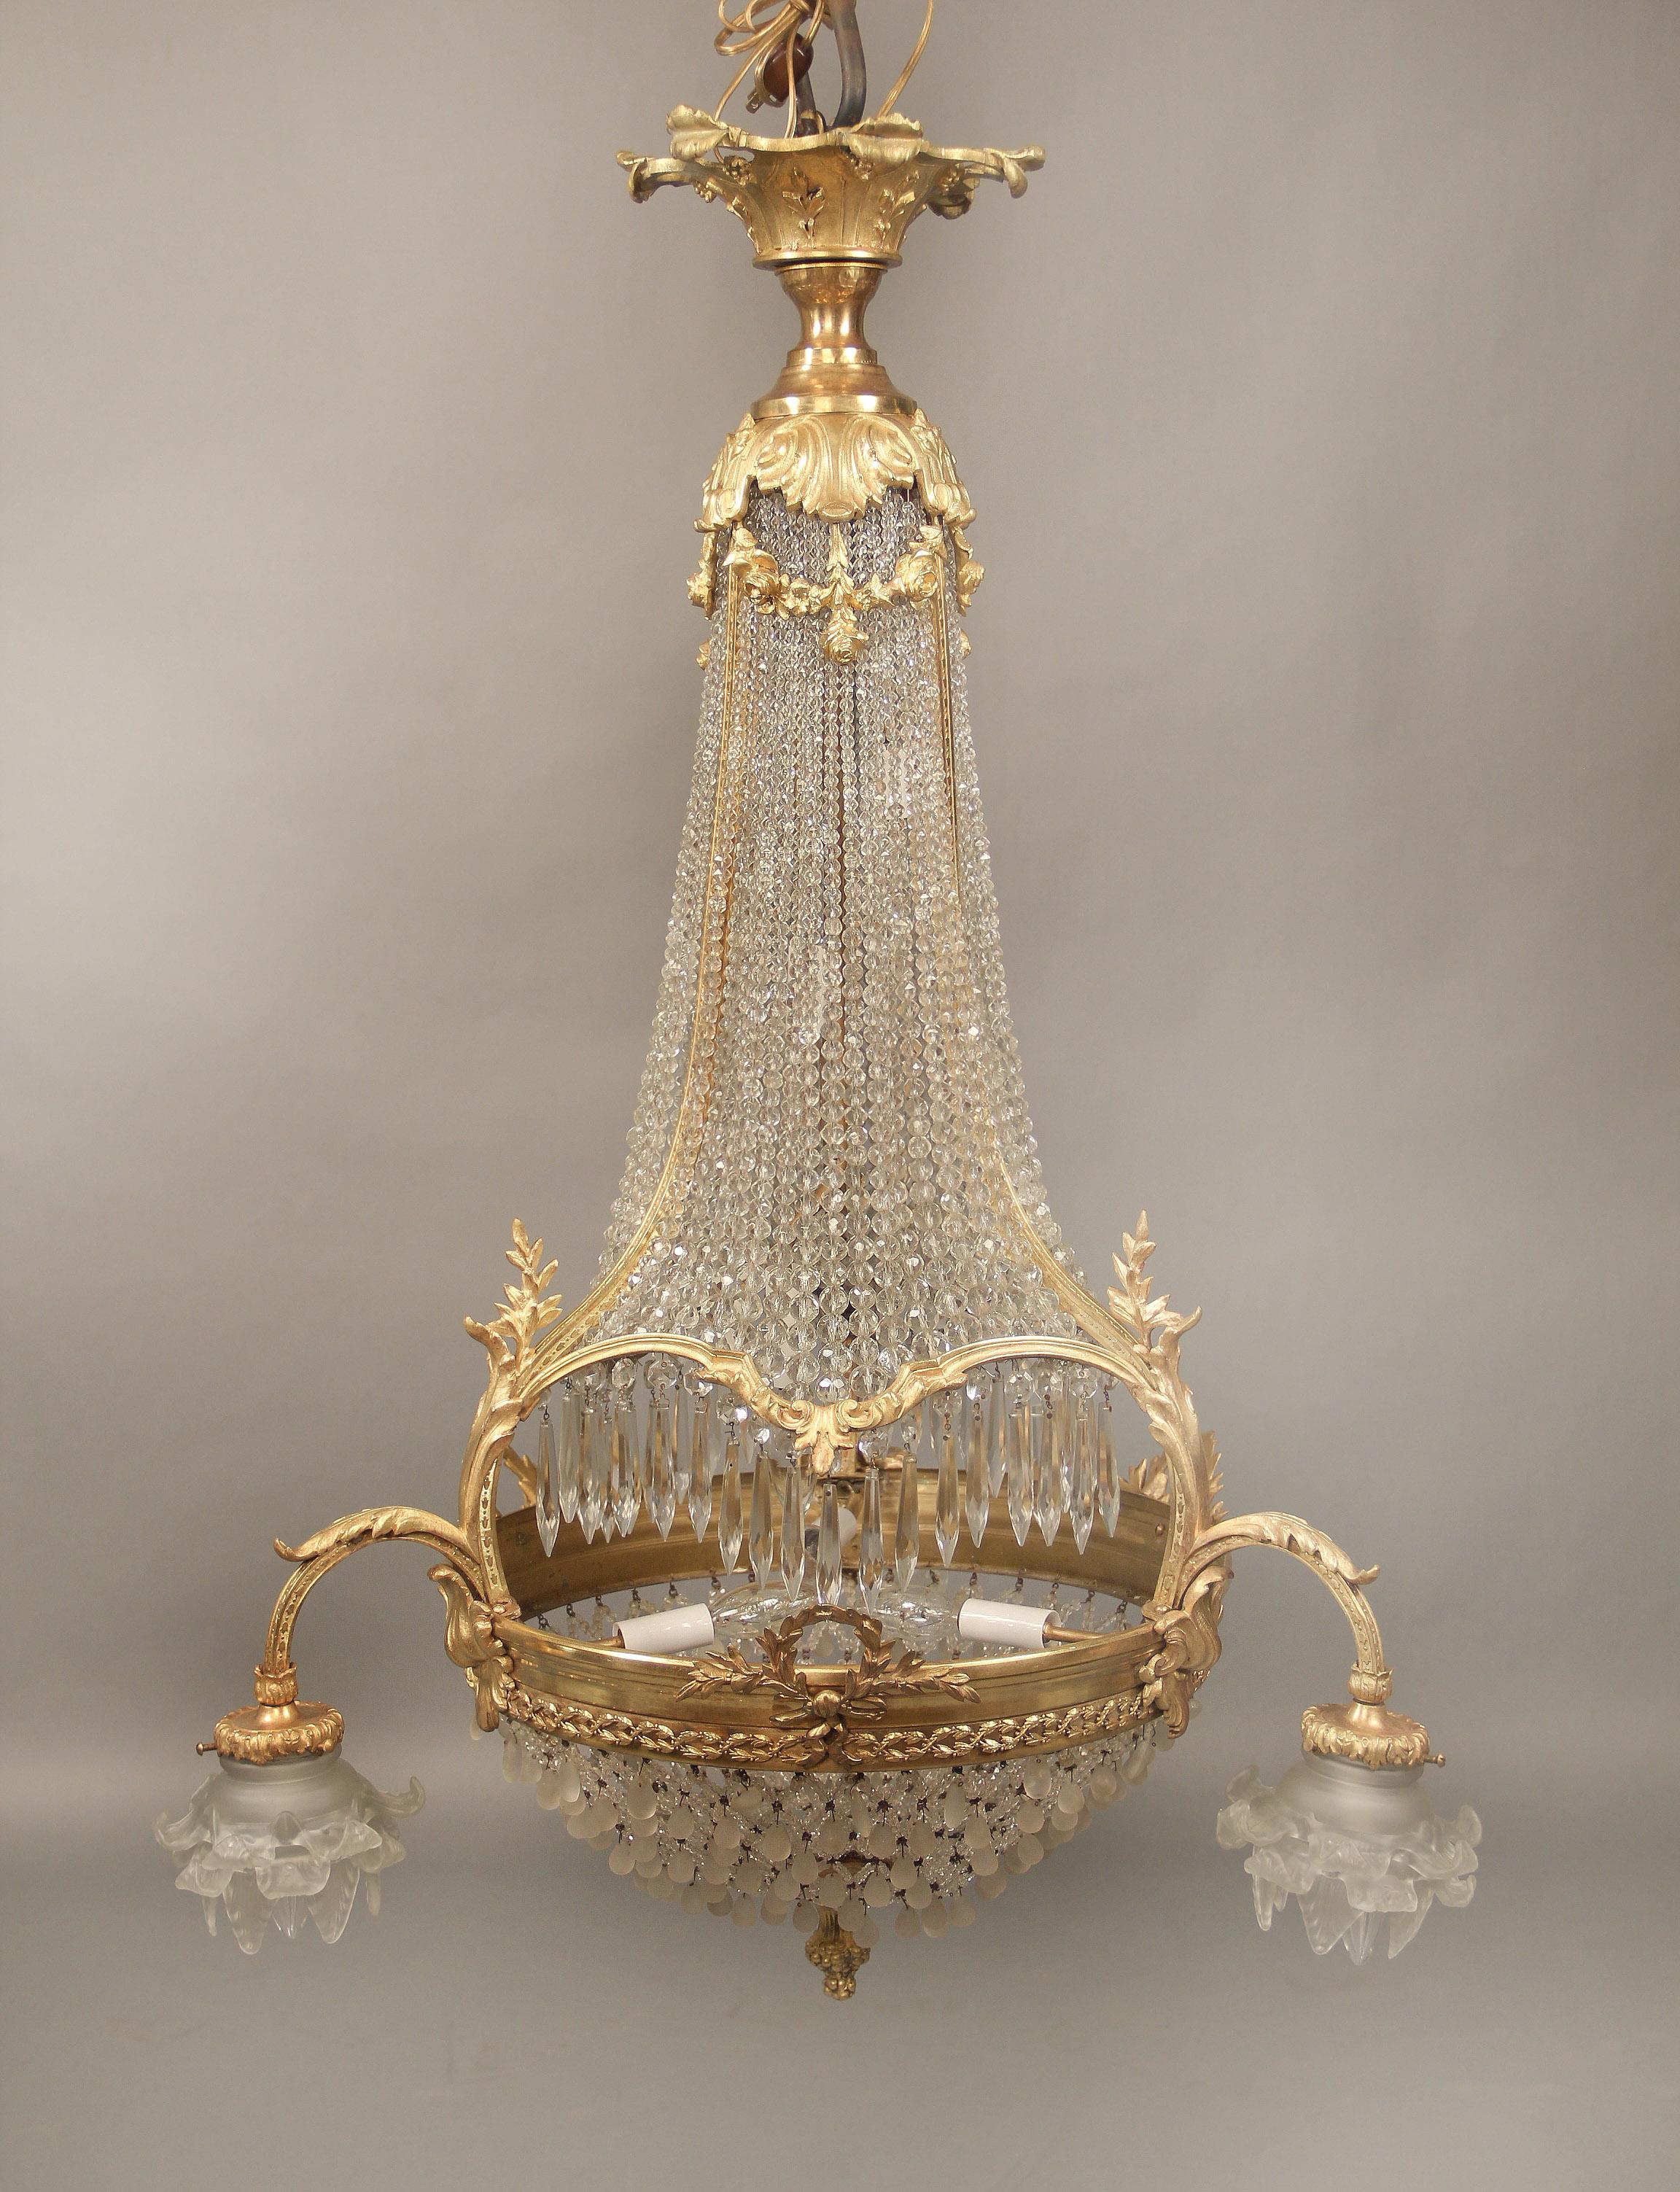 A nice late 19th century gilt bronze beaded basket nine-light chandelier.

The upper and lower part of the cage connected by bronze straps, the top with floral designs, the bottom with wreaths and three arms with rose shades, six tiered interior